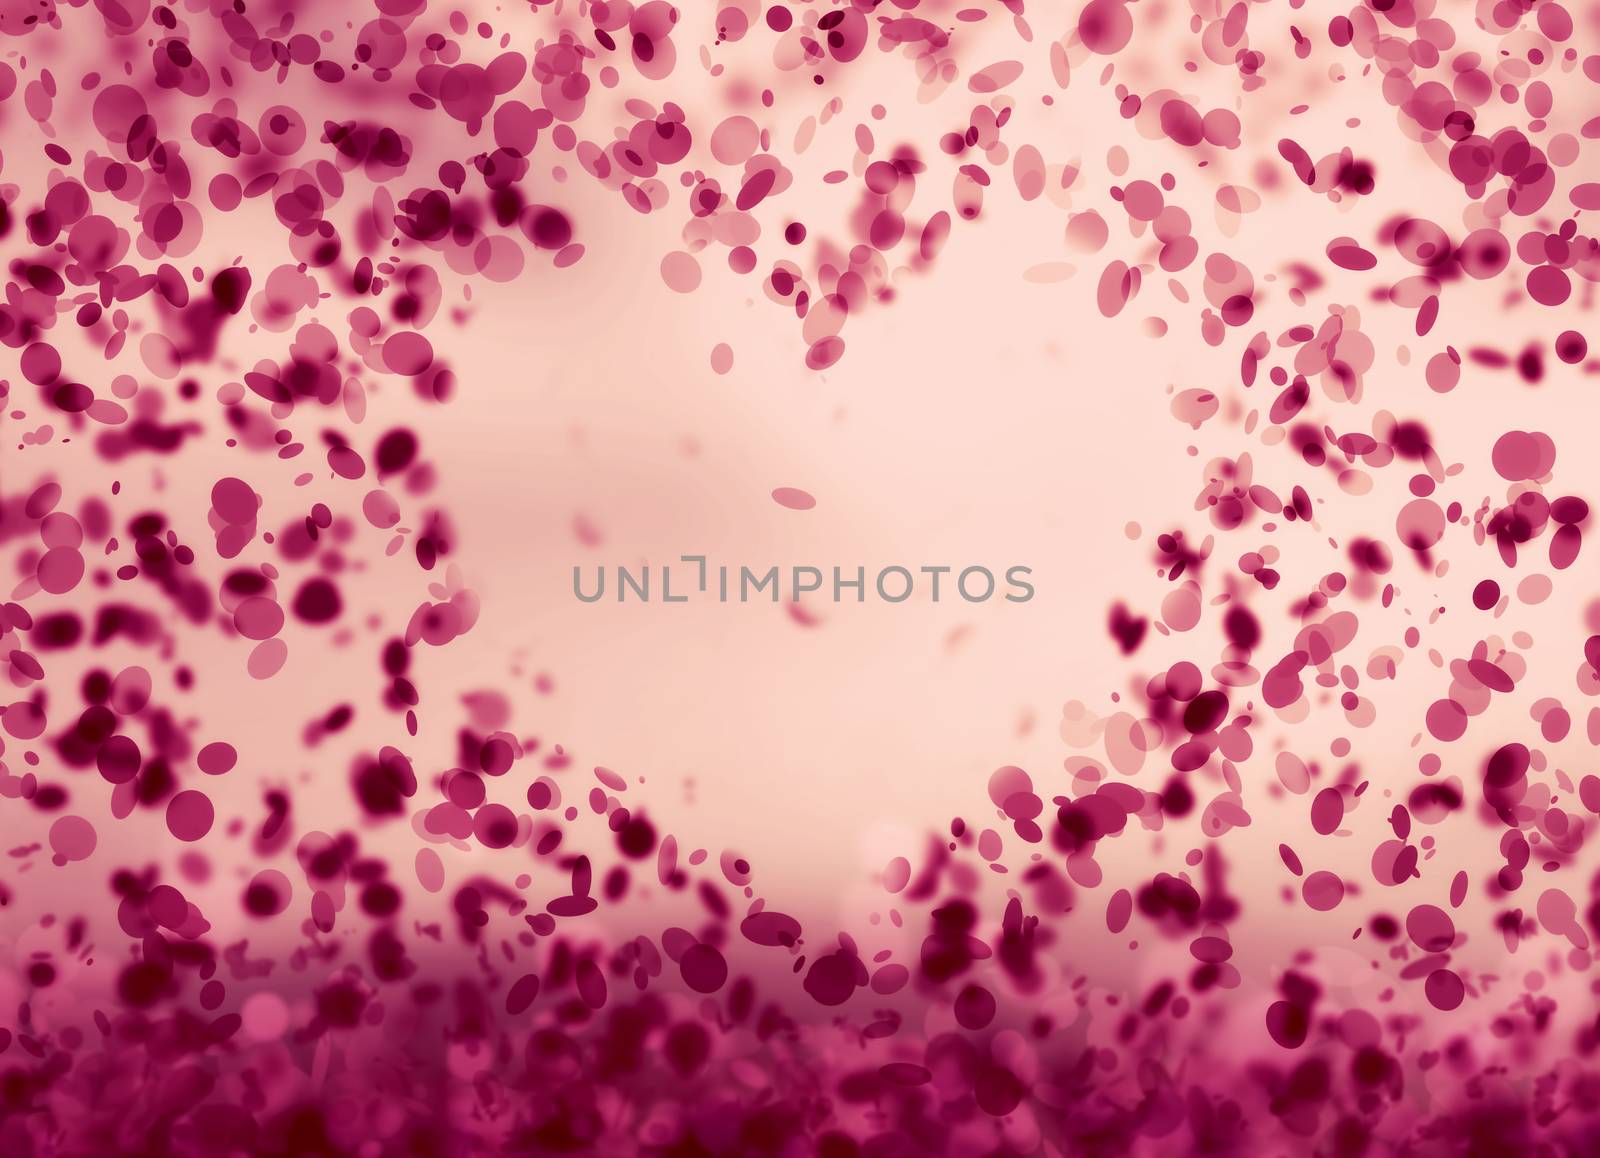 Flower petals making a heart shape on vintage romantic sky. Love, Valentine's Day concepts.